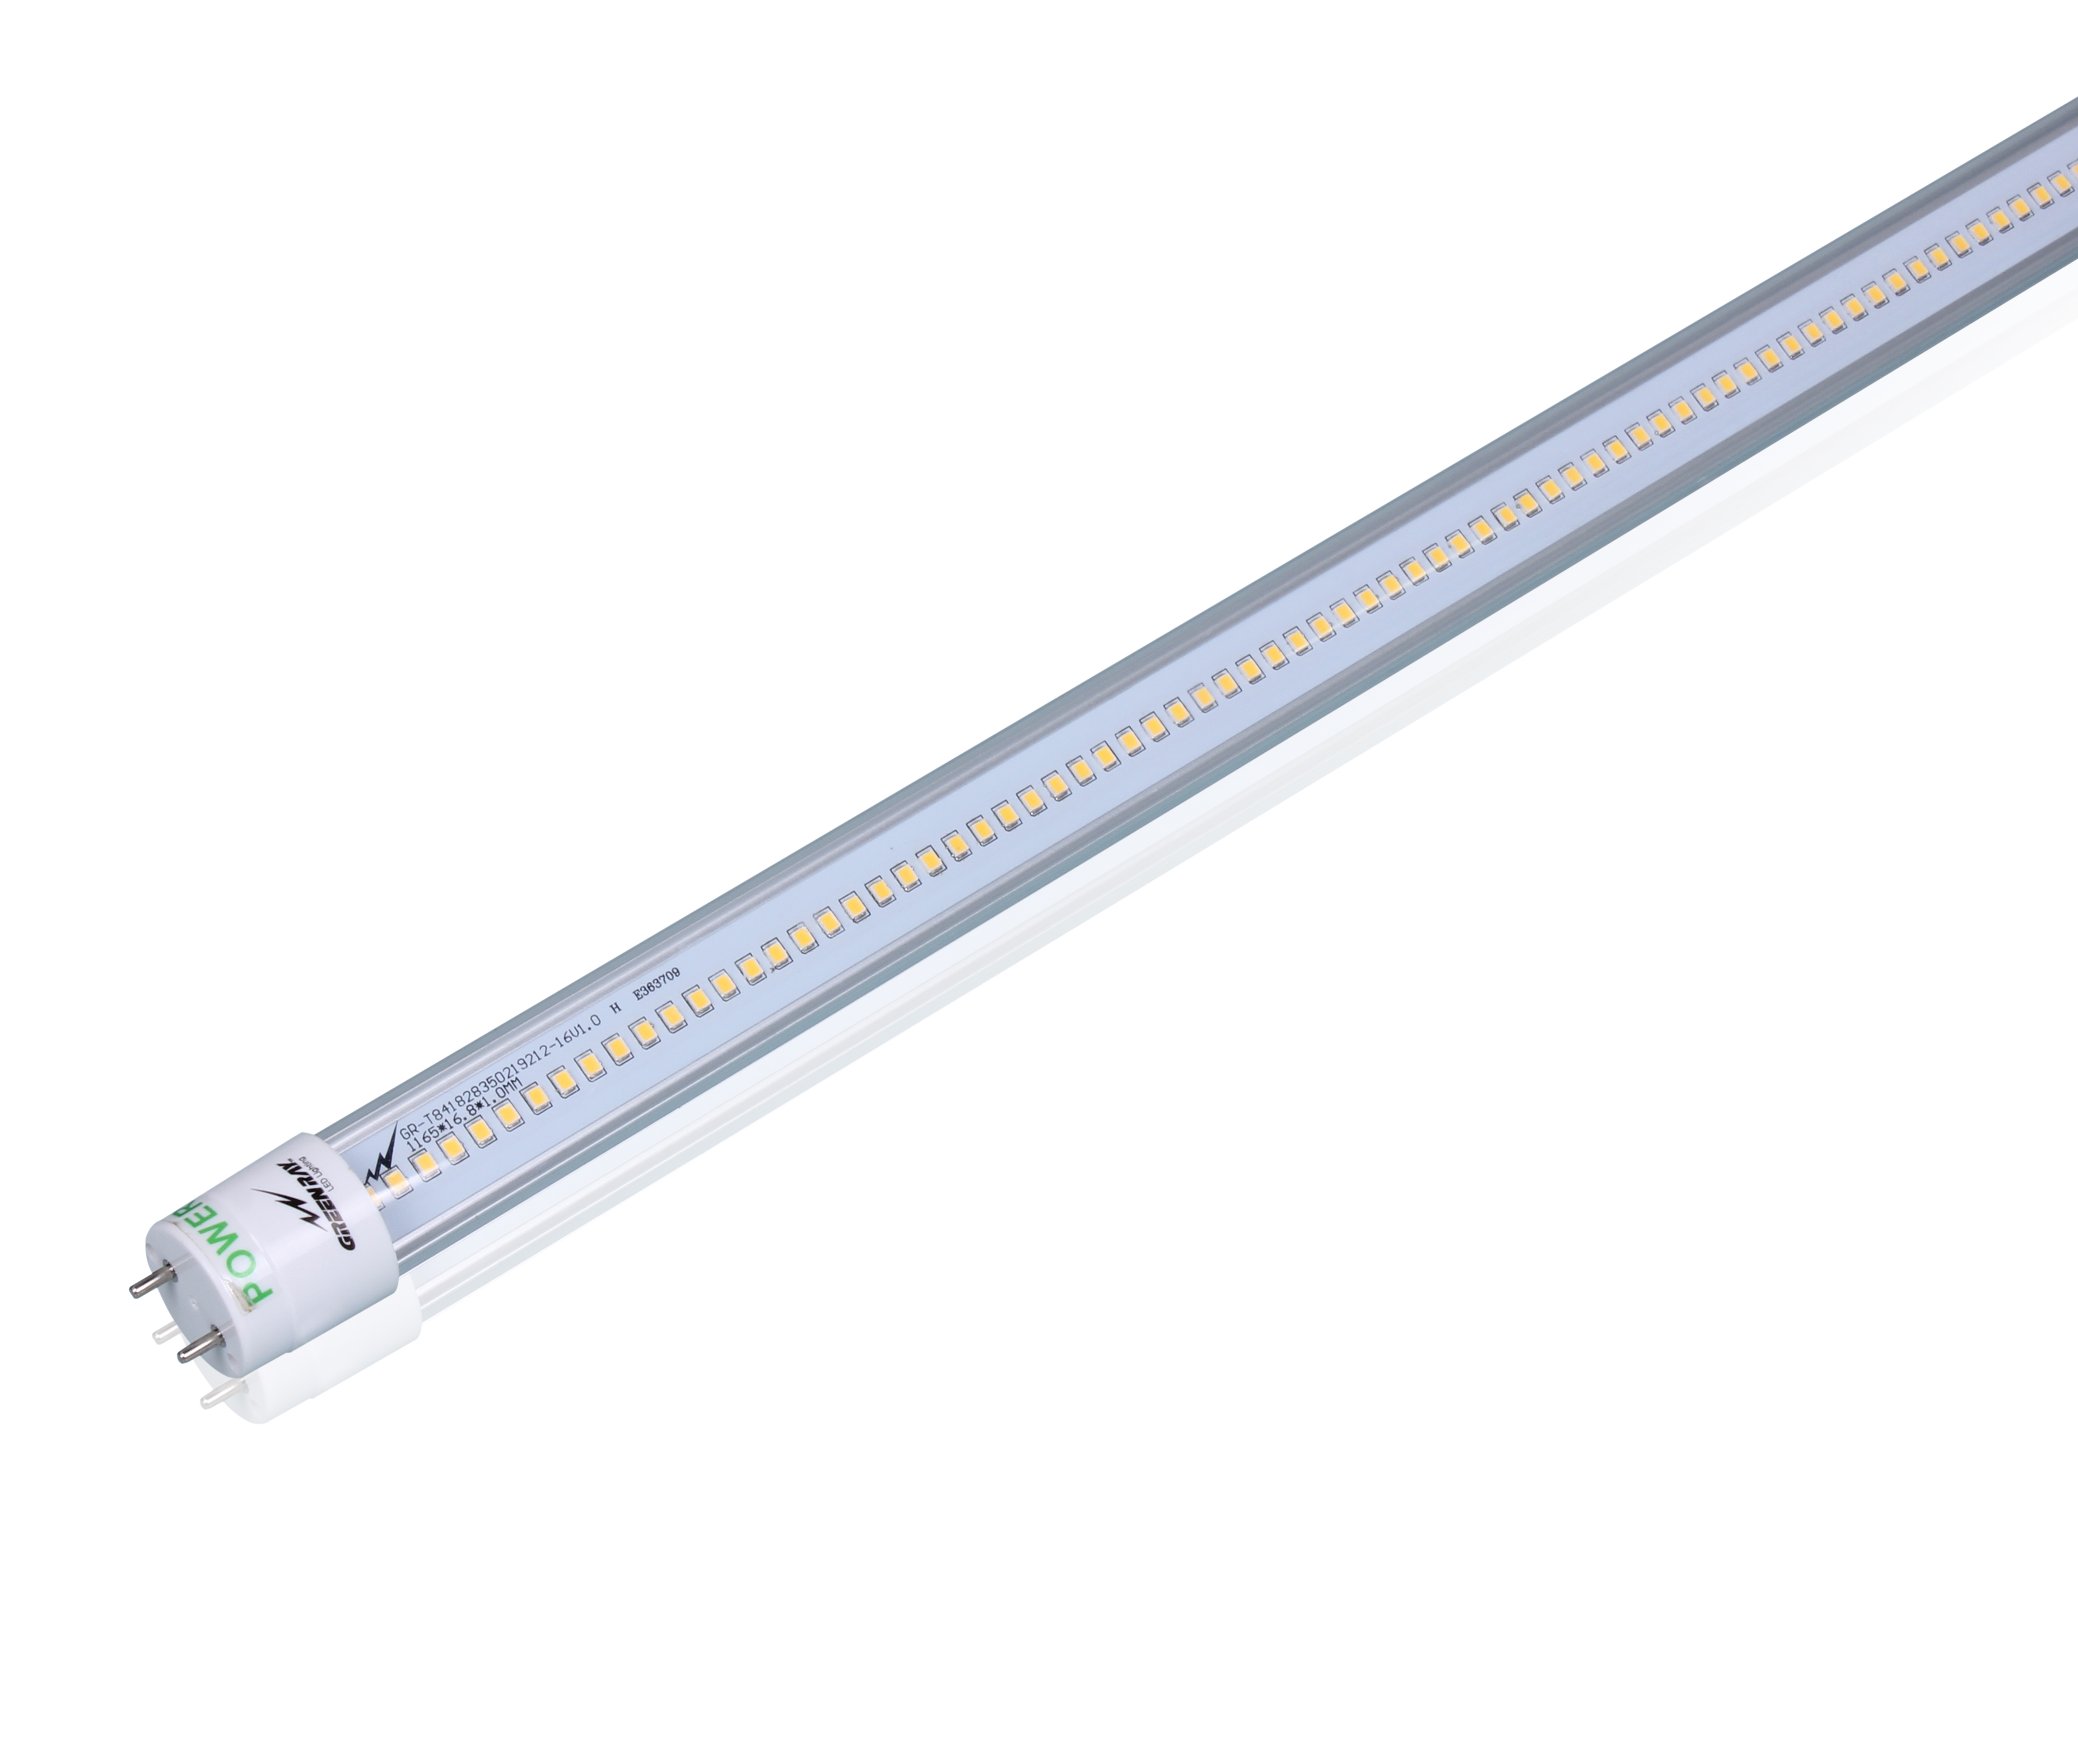 T8 LED tube, 1500mm, 22W, 80Ra 120lm/W, CE\RoHS\UL certificated, 5 years warranty, SMD 2835